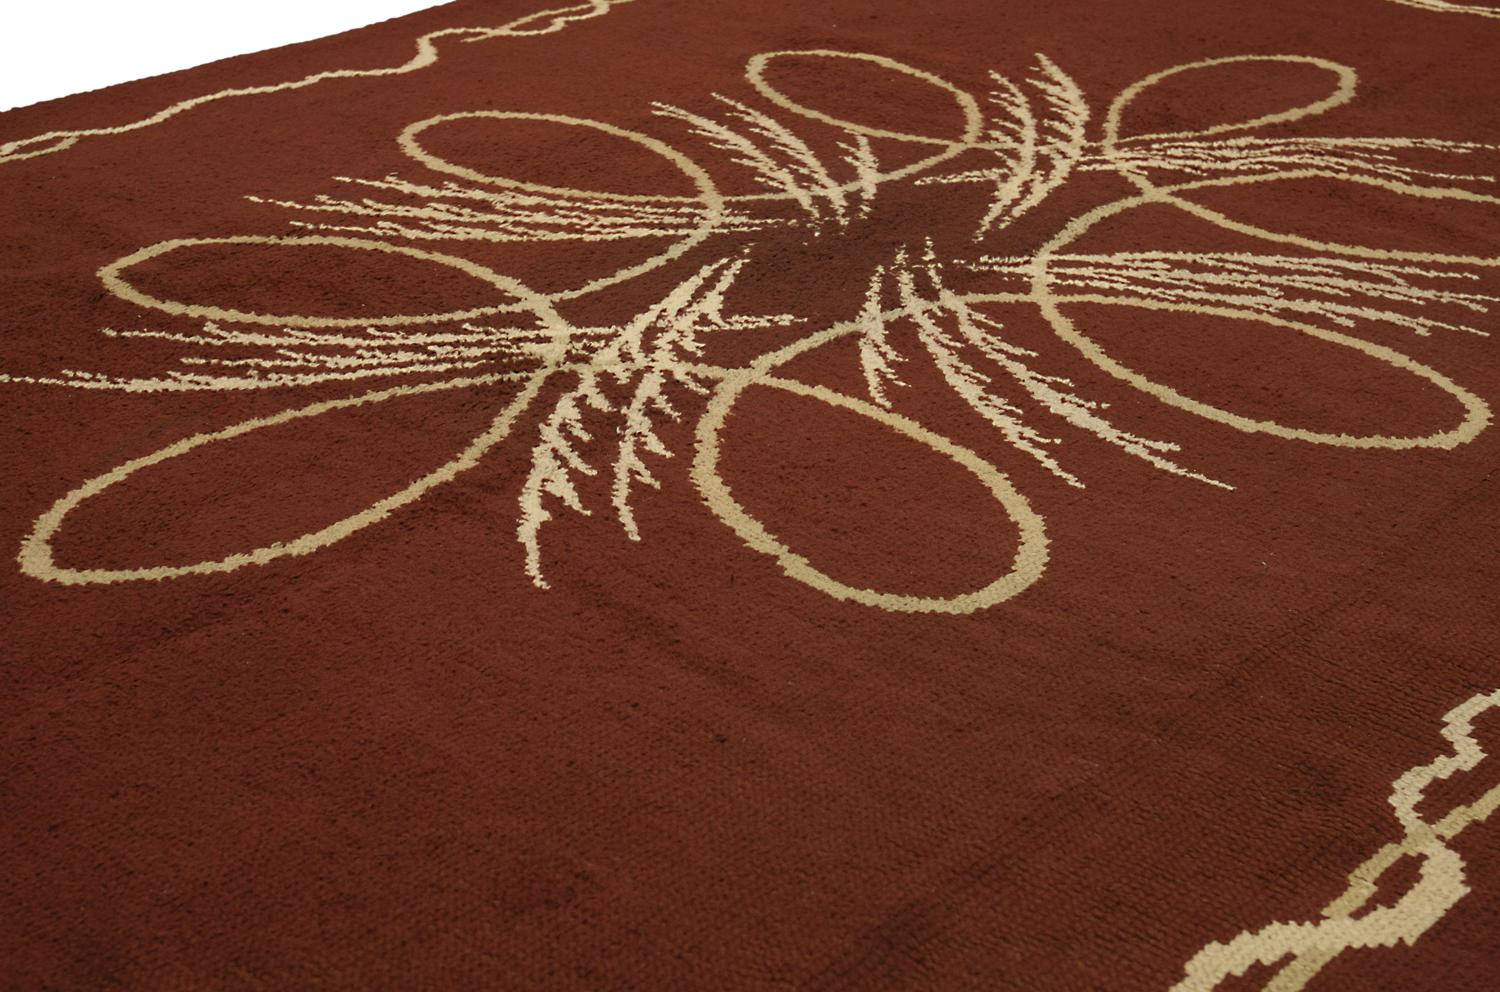 This is a Mid-century European carpet that was woven during the mid-20th century circa 1950 and measures 353x 243 CM in size. This carpet has a modern artistic design with a non-traditional center medallion set on brown-colored open field